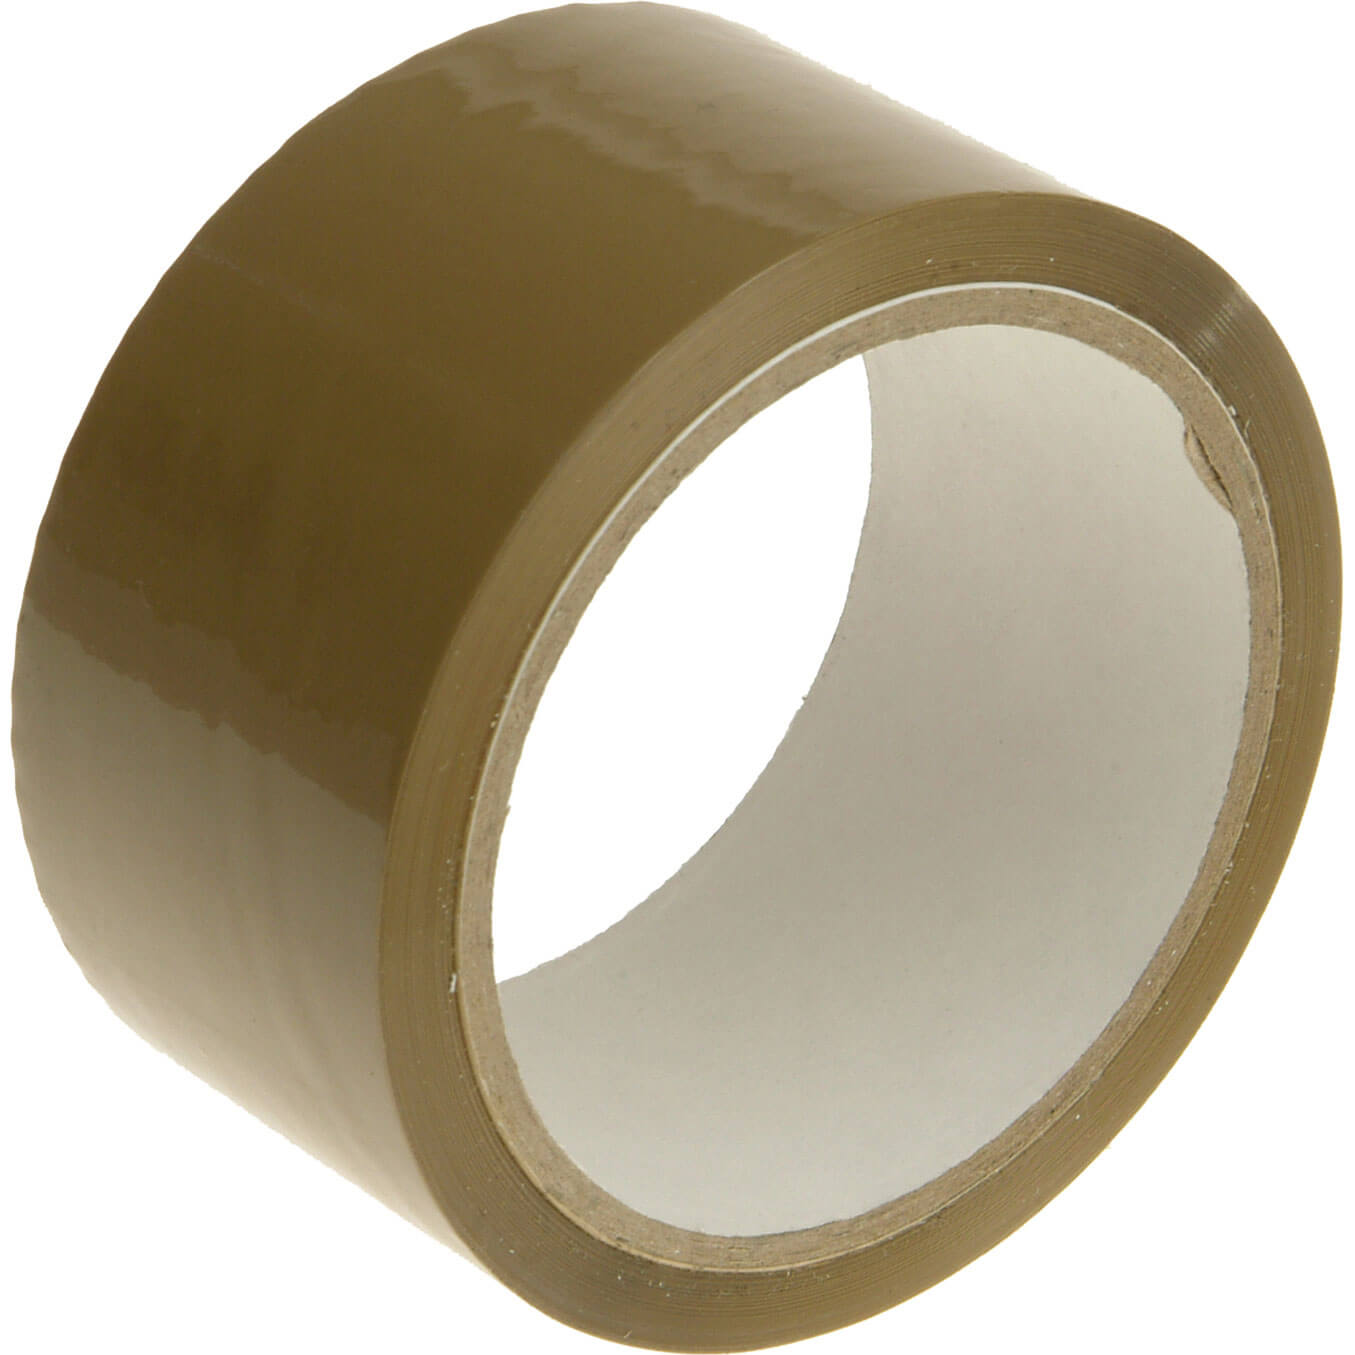 Packing Tape Brown 48mm x 66m Box of 36 Rolls